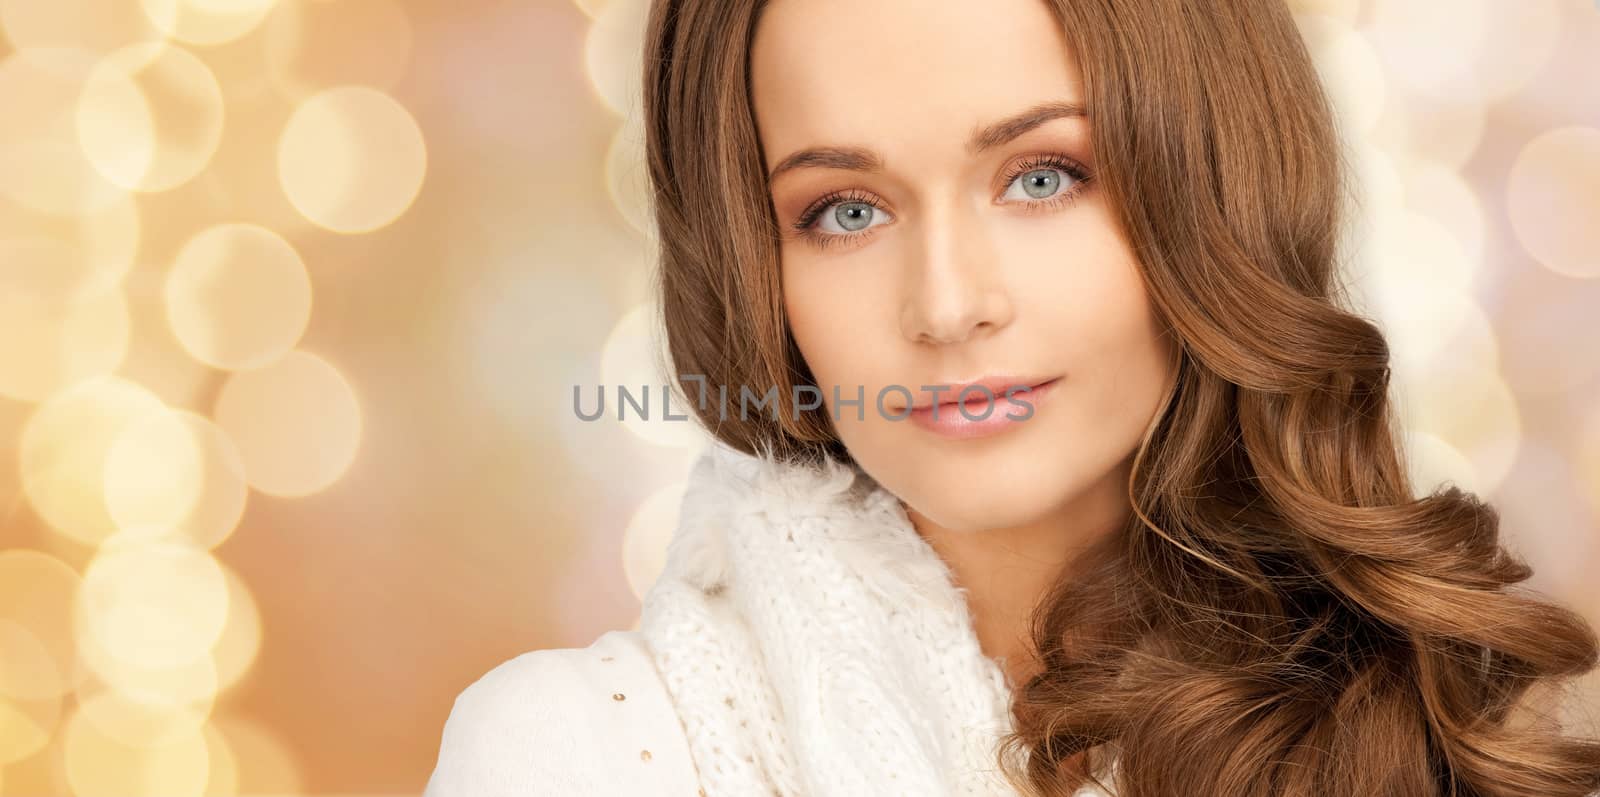 happiness, winter holidays, christmas and people concept - close up of smiling young woman in white warm clothes over beige lights background